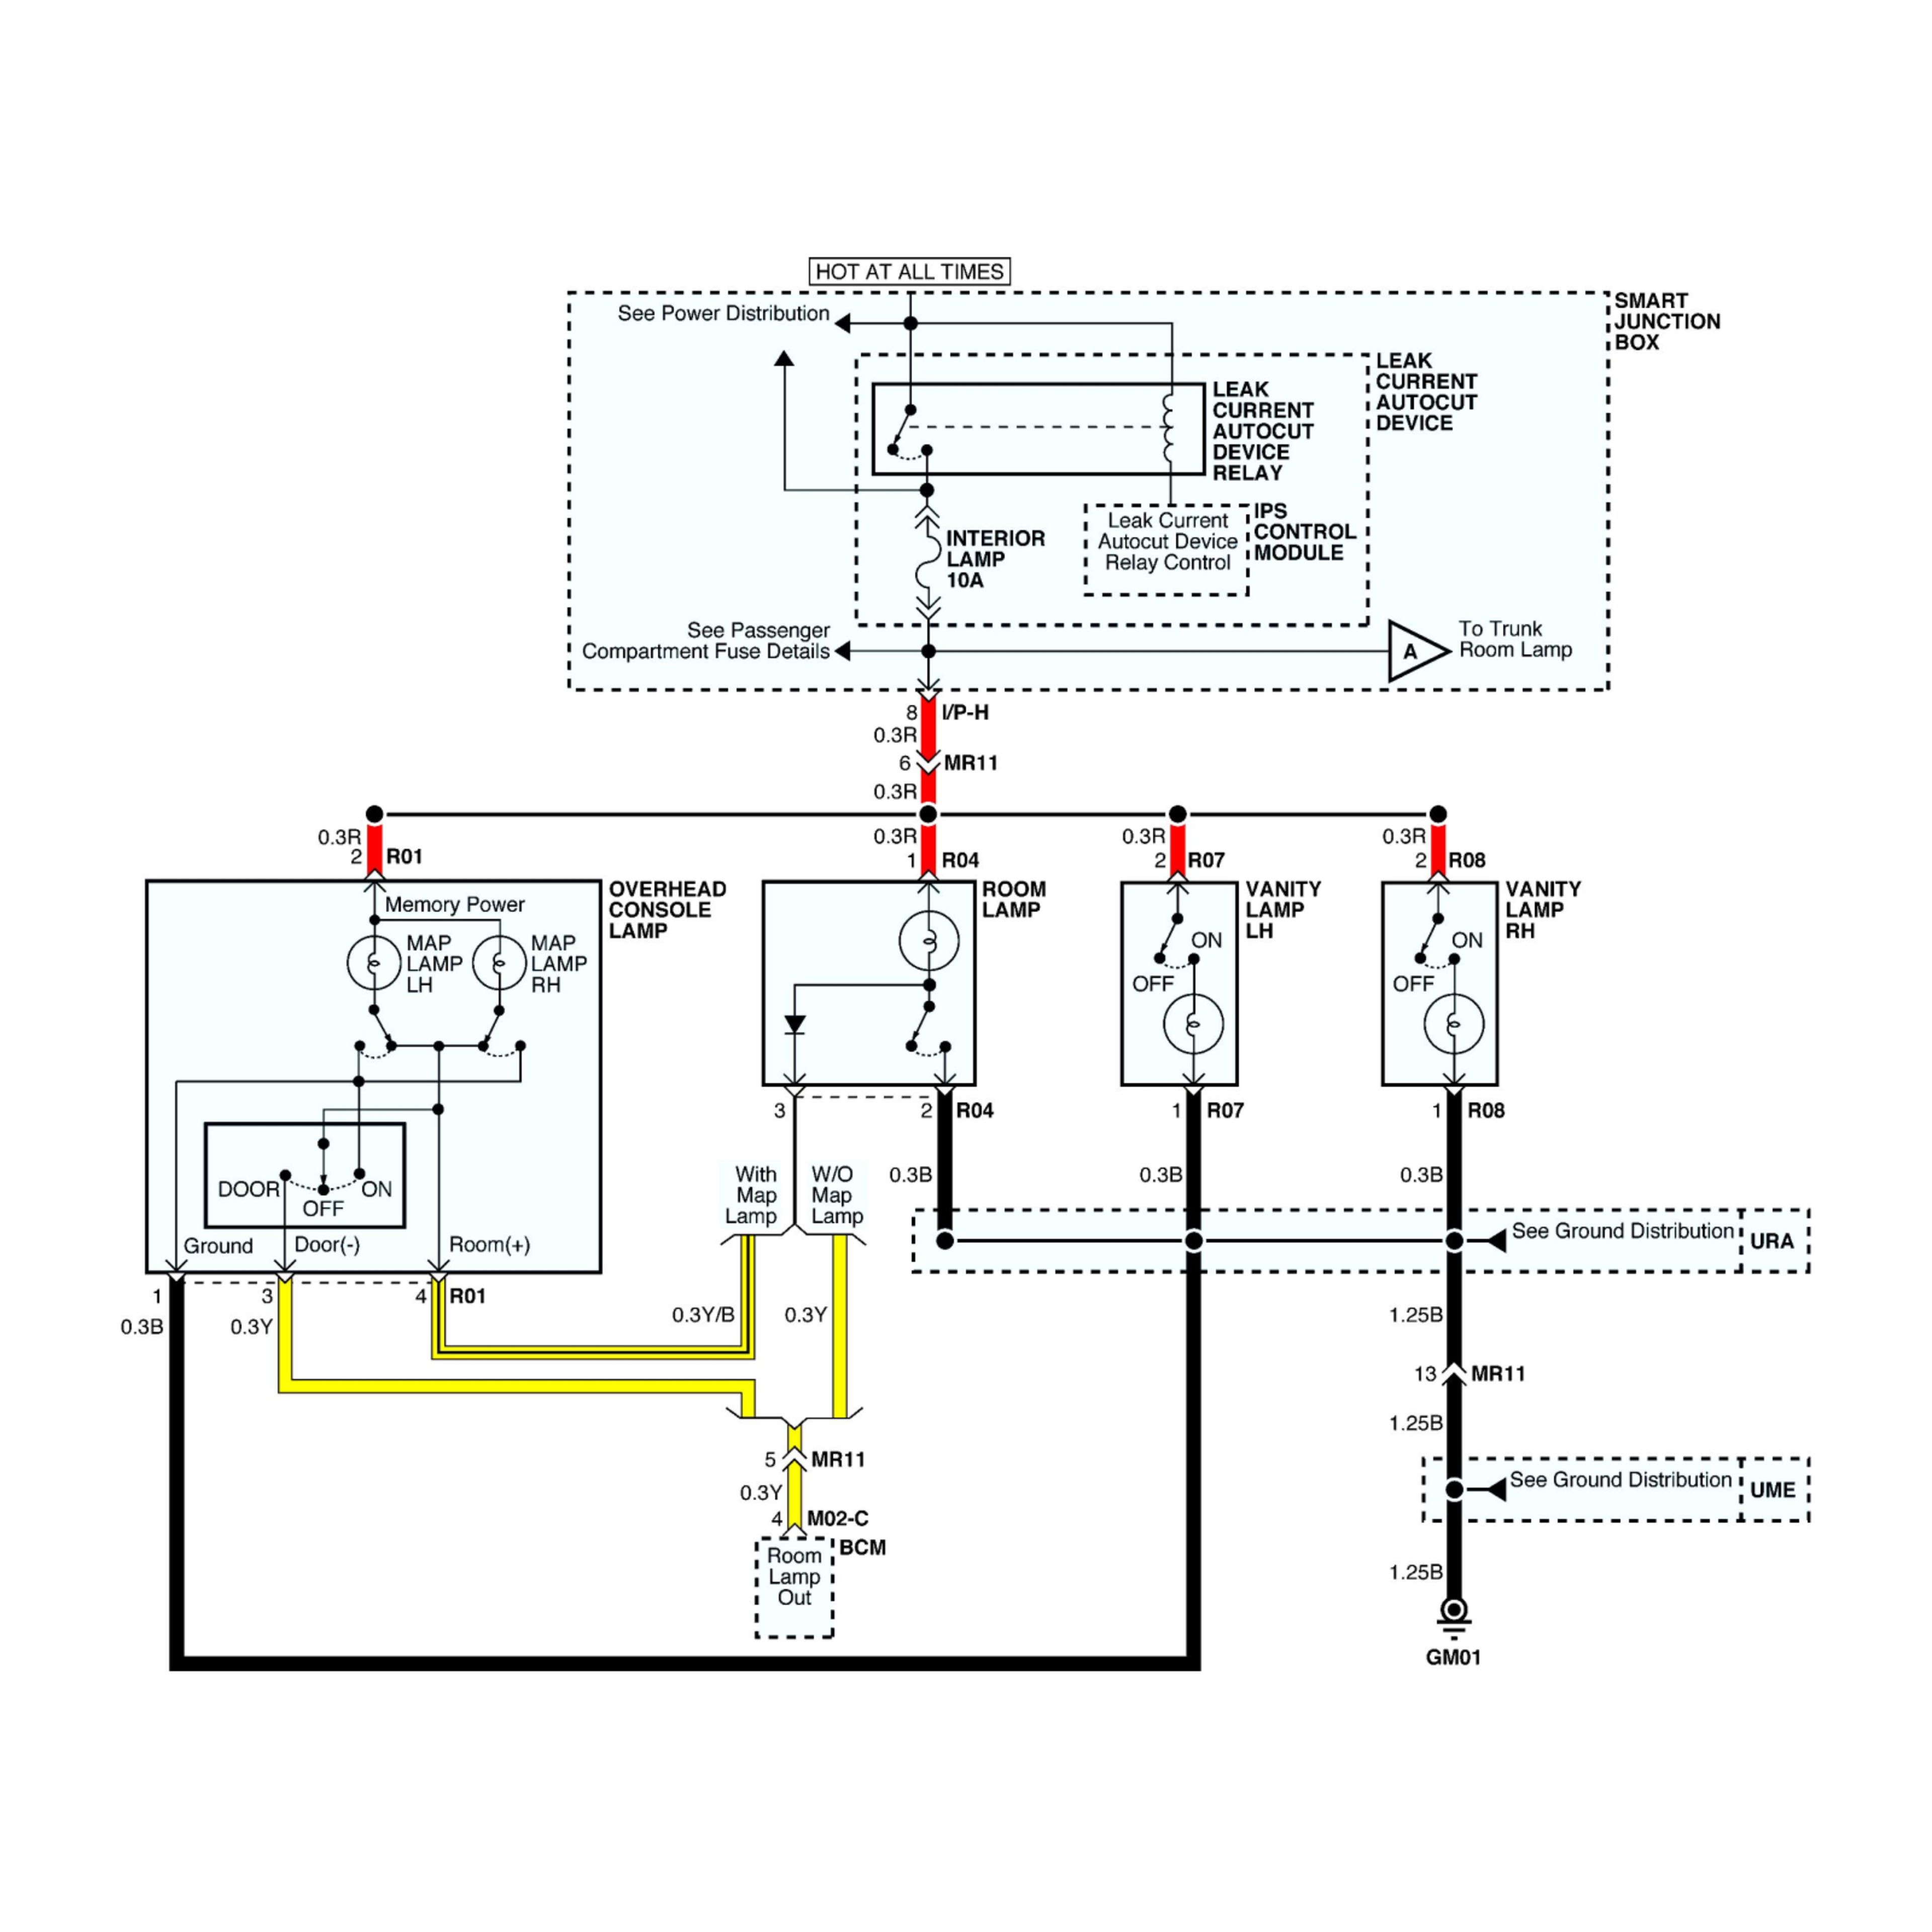 2007 Lincoln Mark LT wiring diagrams example